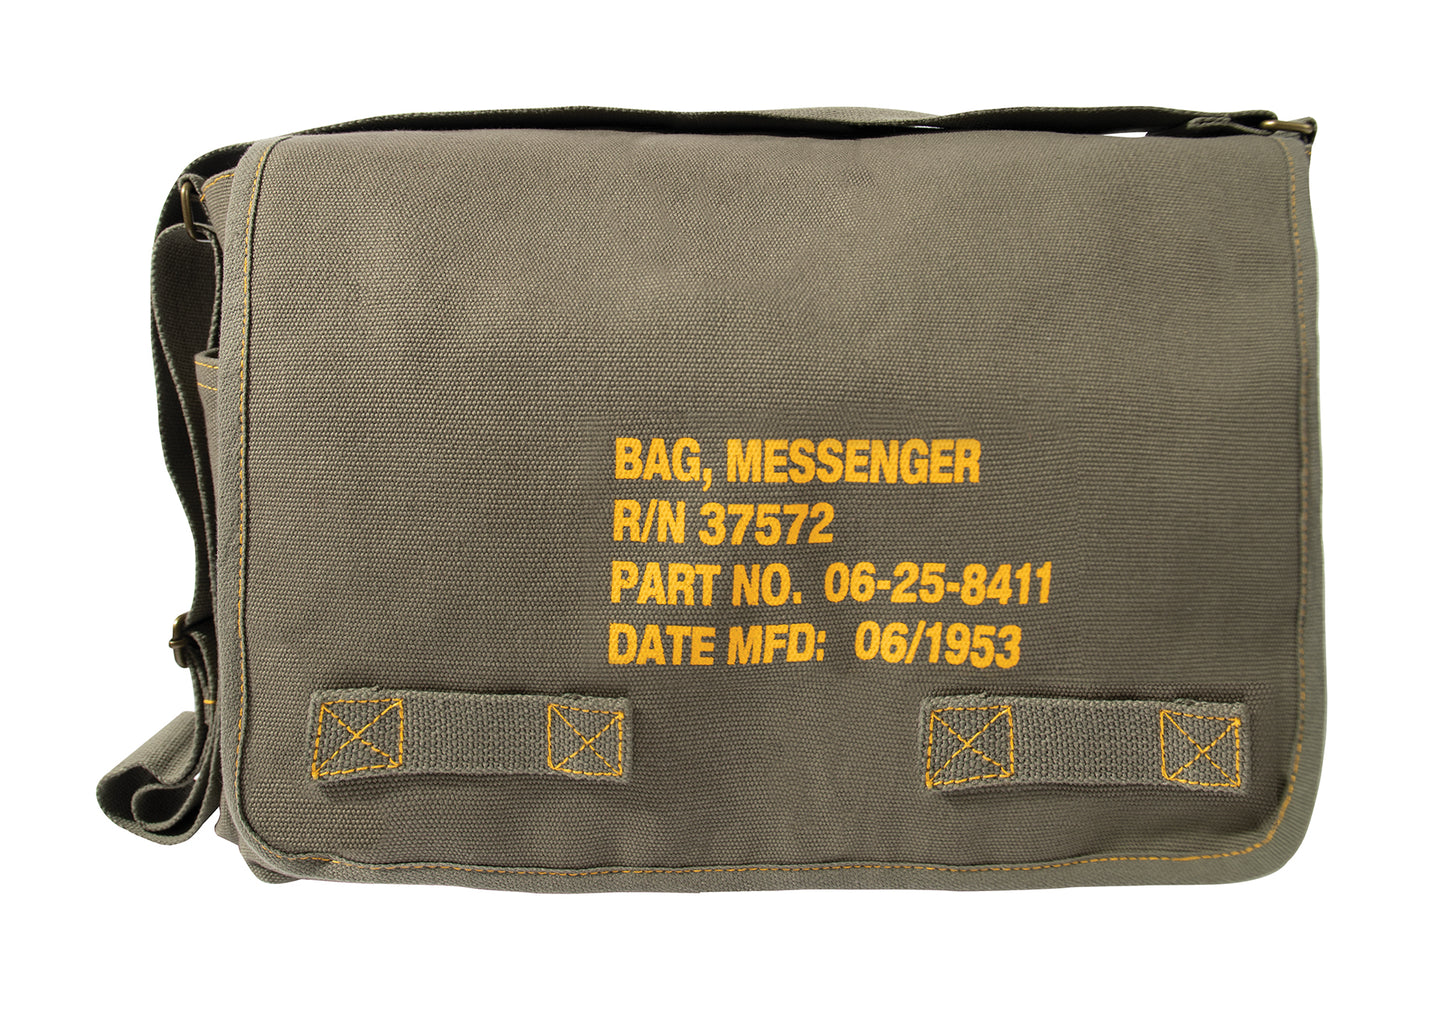 Heavyweight Canvas Classic Messenger Bag With Military Stencil Messenger Bags & Shoulder Bags MilTac Tactical Military Outdoor Gear Australia